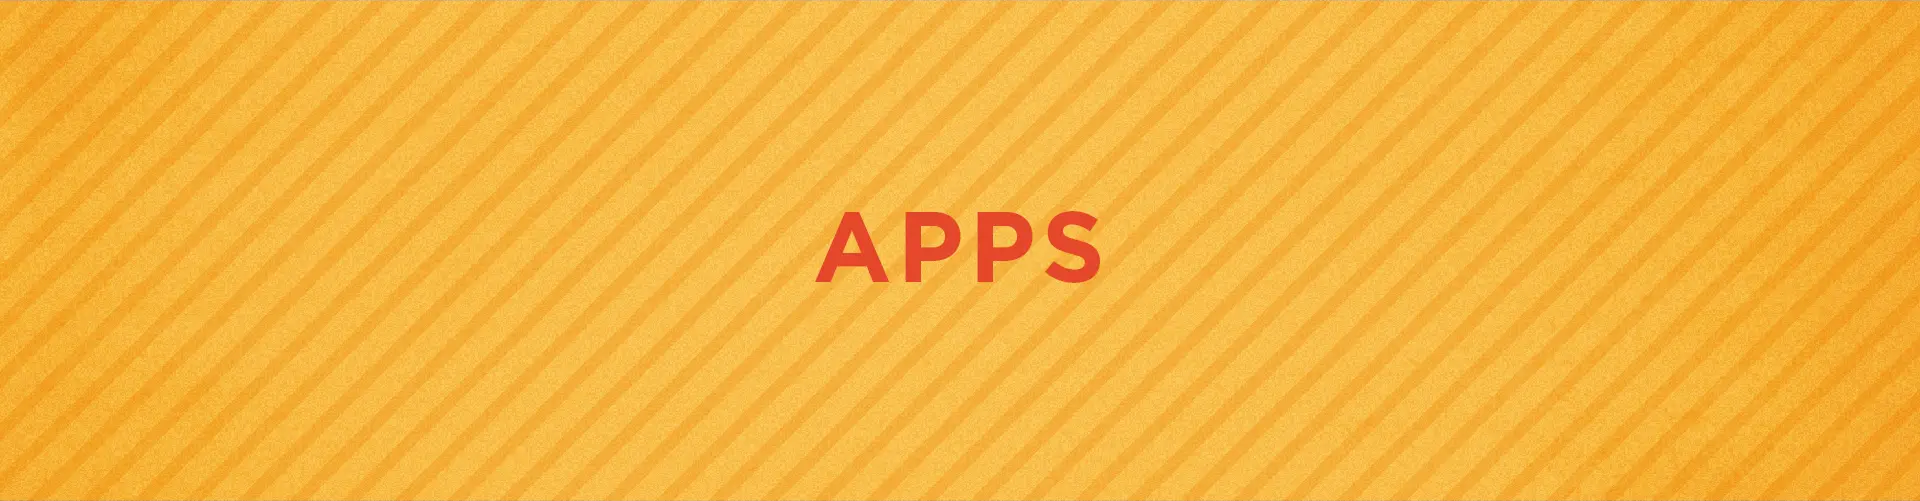 Resources Background-apps.png